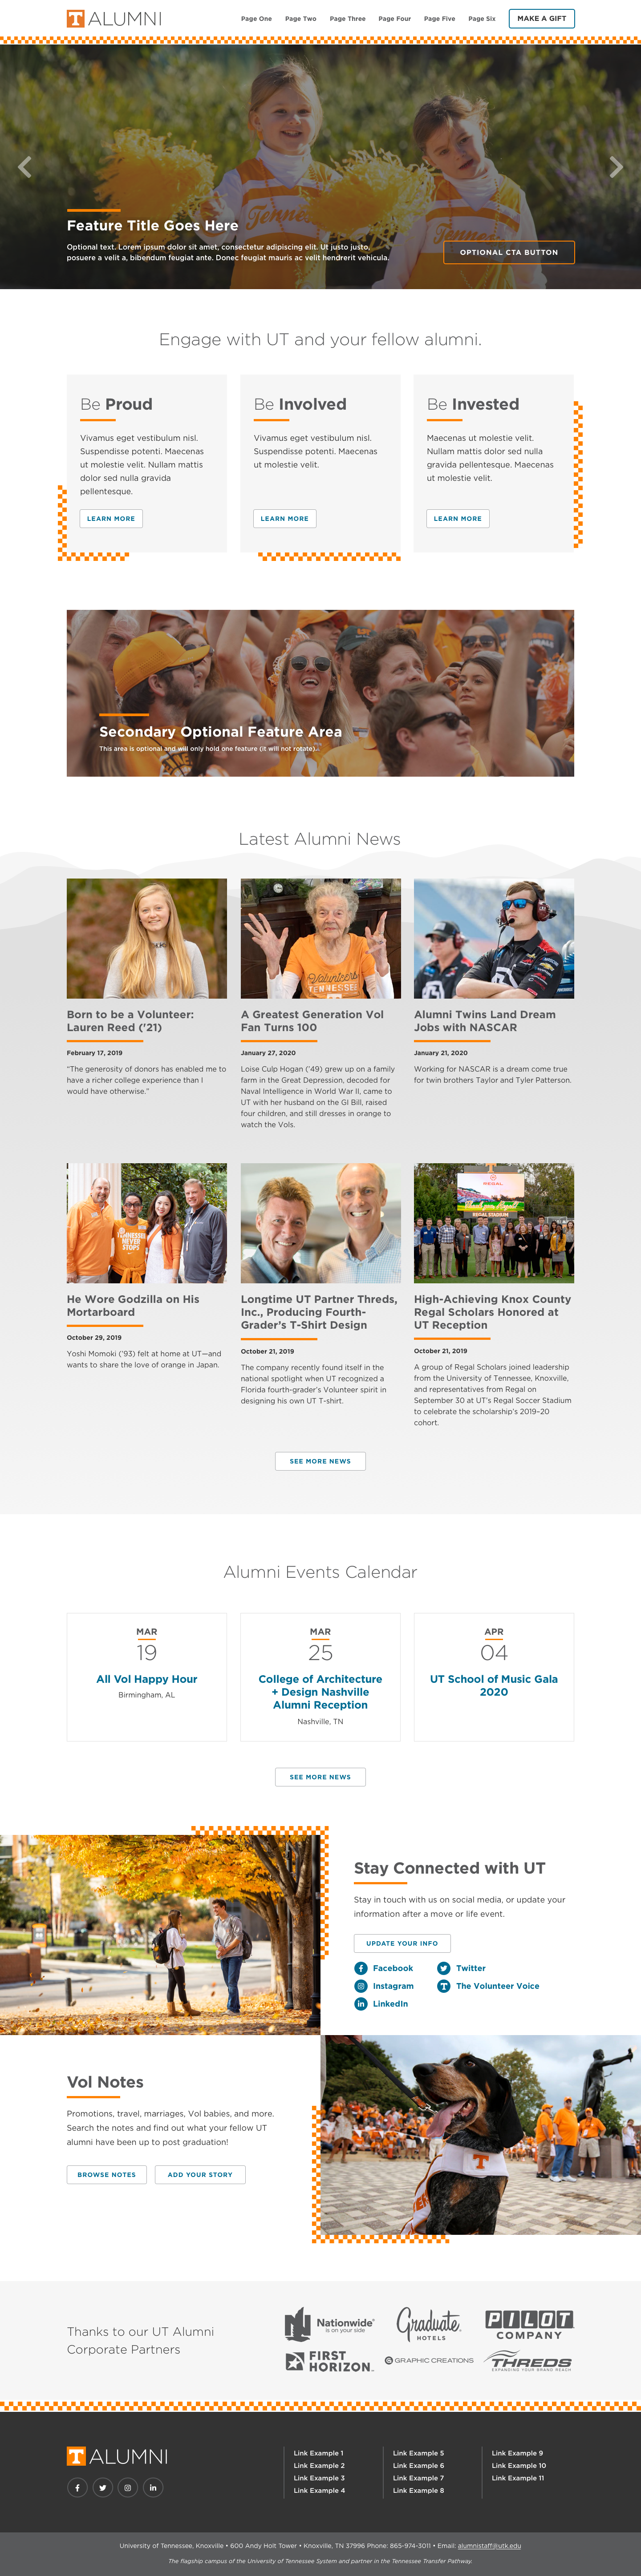 Initial Concept A from the University of Tennessee Alumni Association Redesign